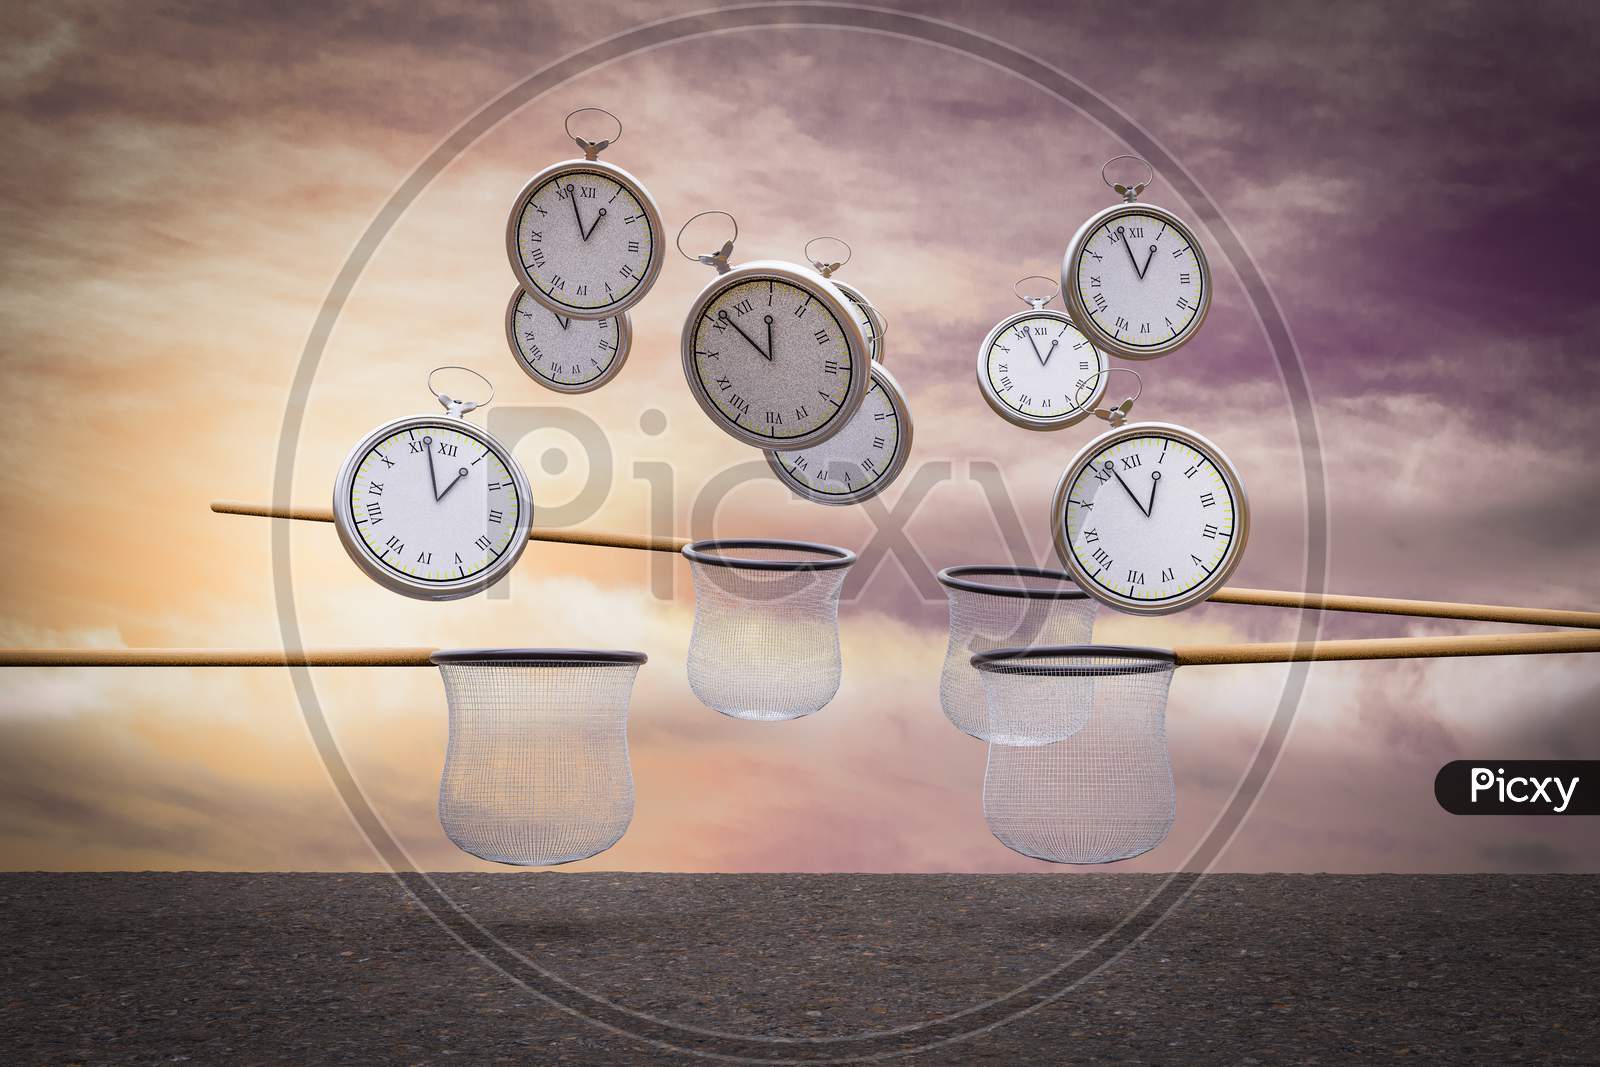 Pocket Watches Falling From Sky And The Nets Try To Catch Them At Sunset Magenta Day Demonstrating Catch Time Concept. 3D Illustration